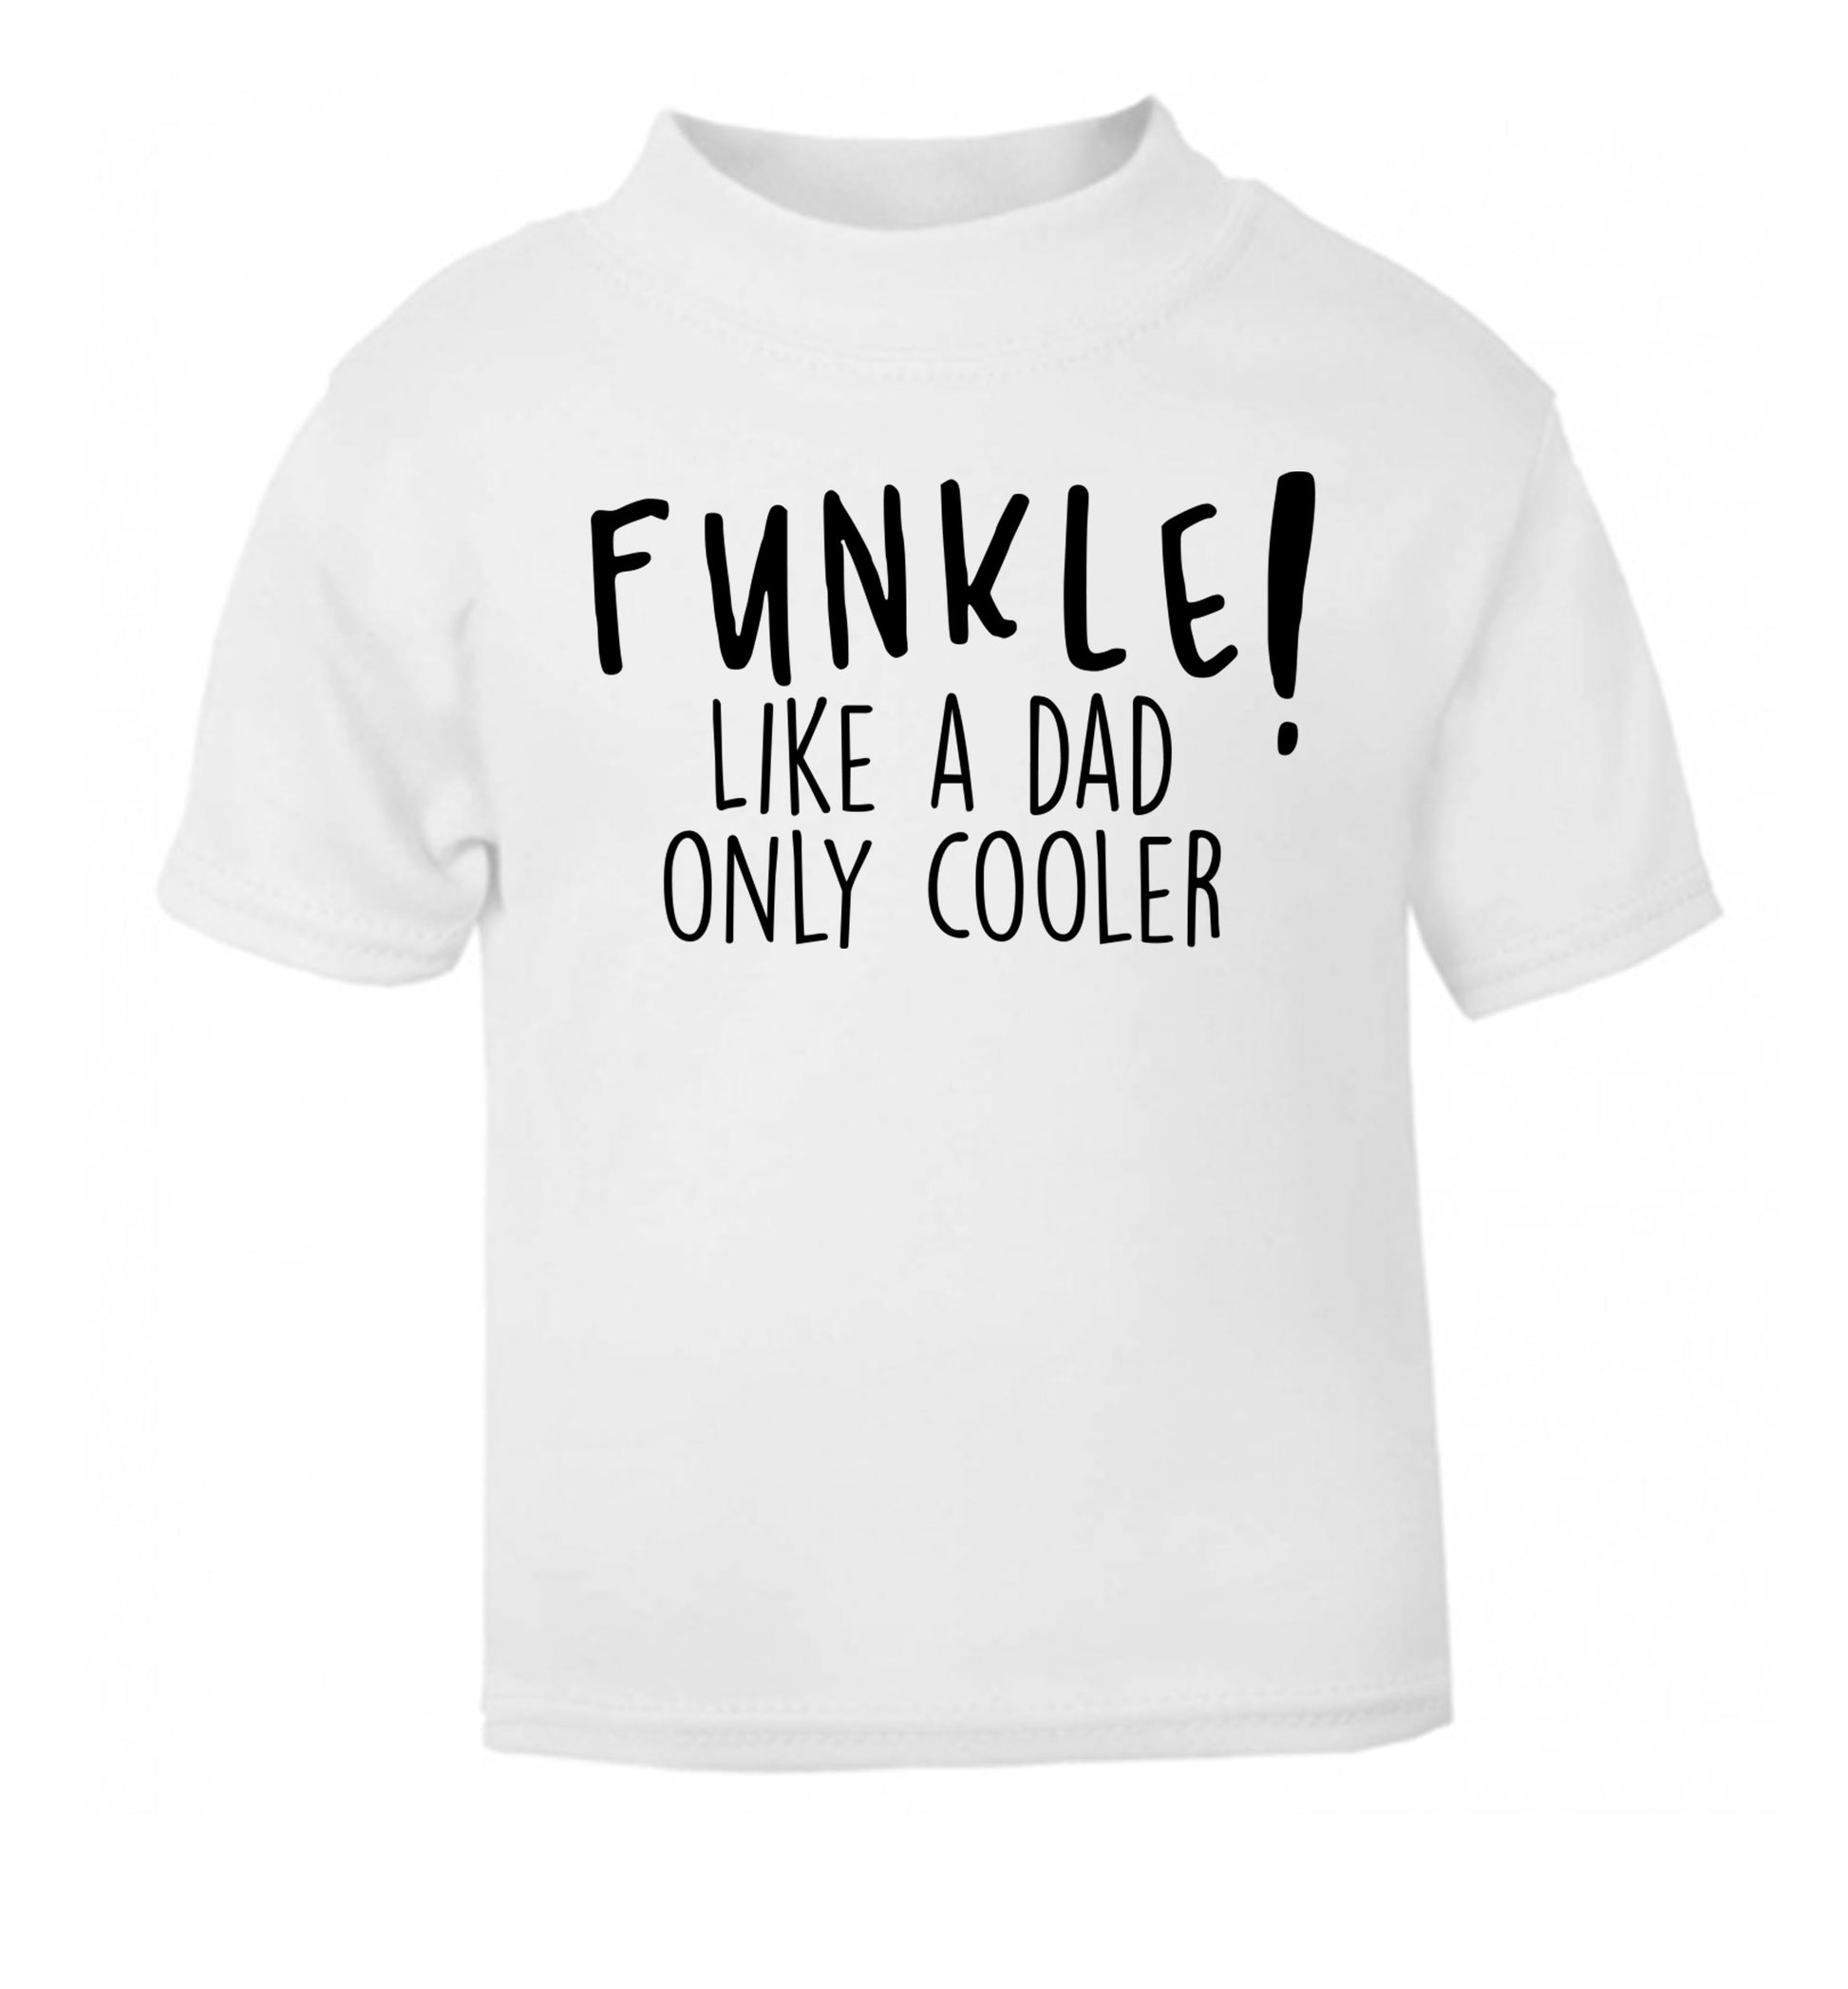 Funkle Like a Dad Only Cooler white Baby Toddler Tshirt 2 Years